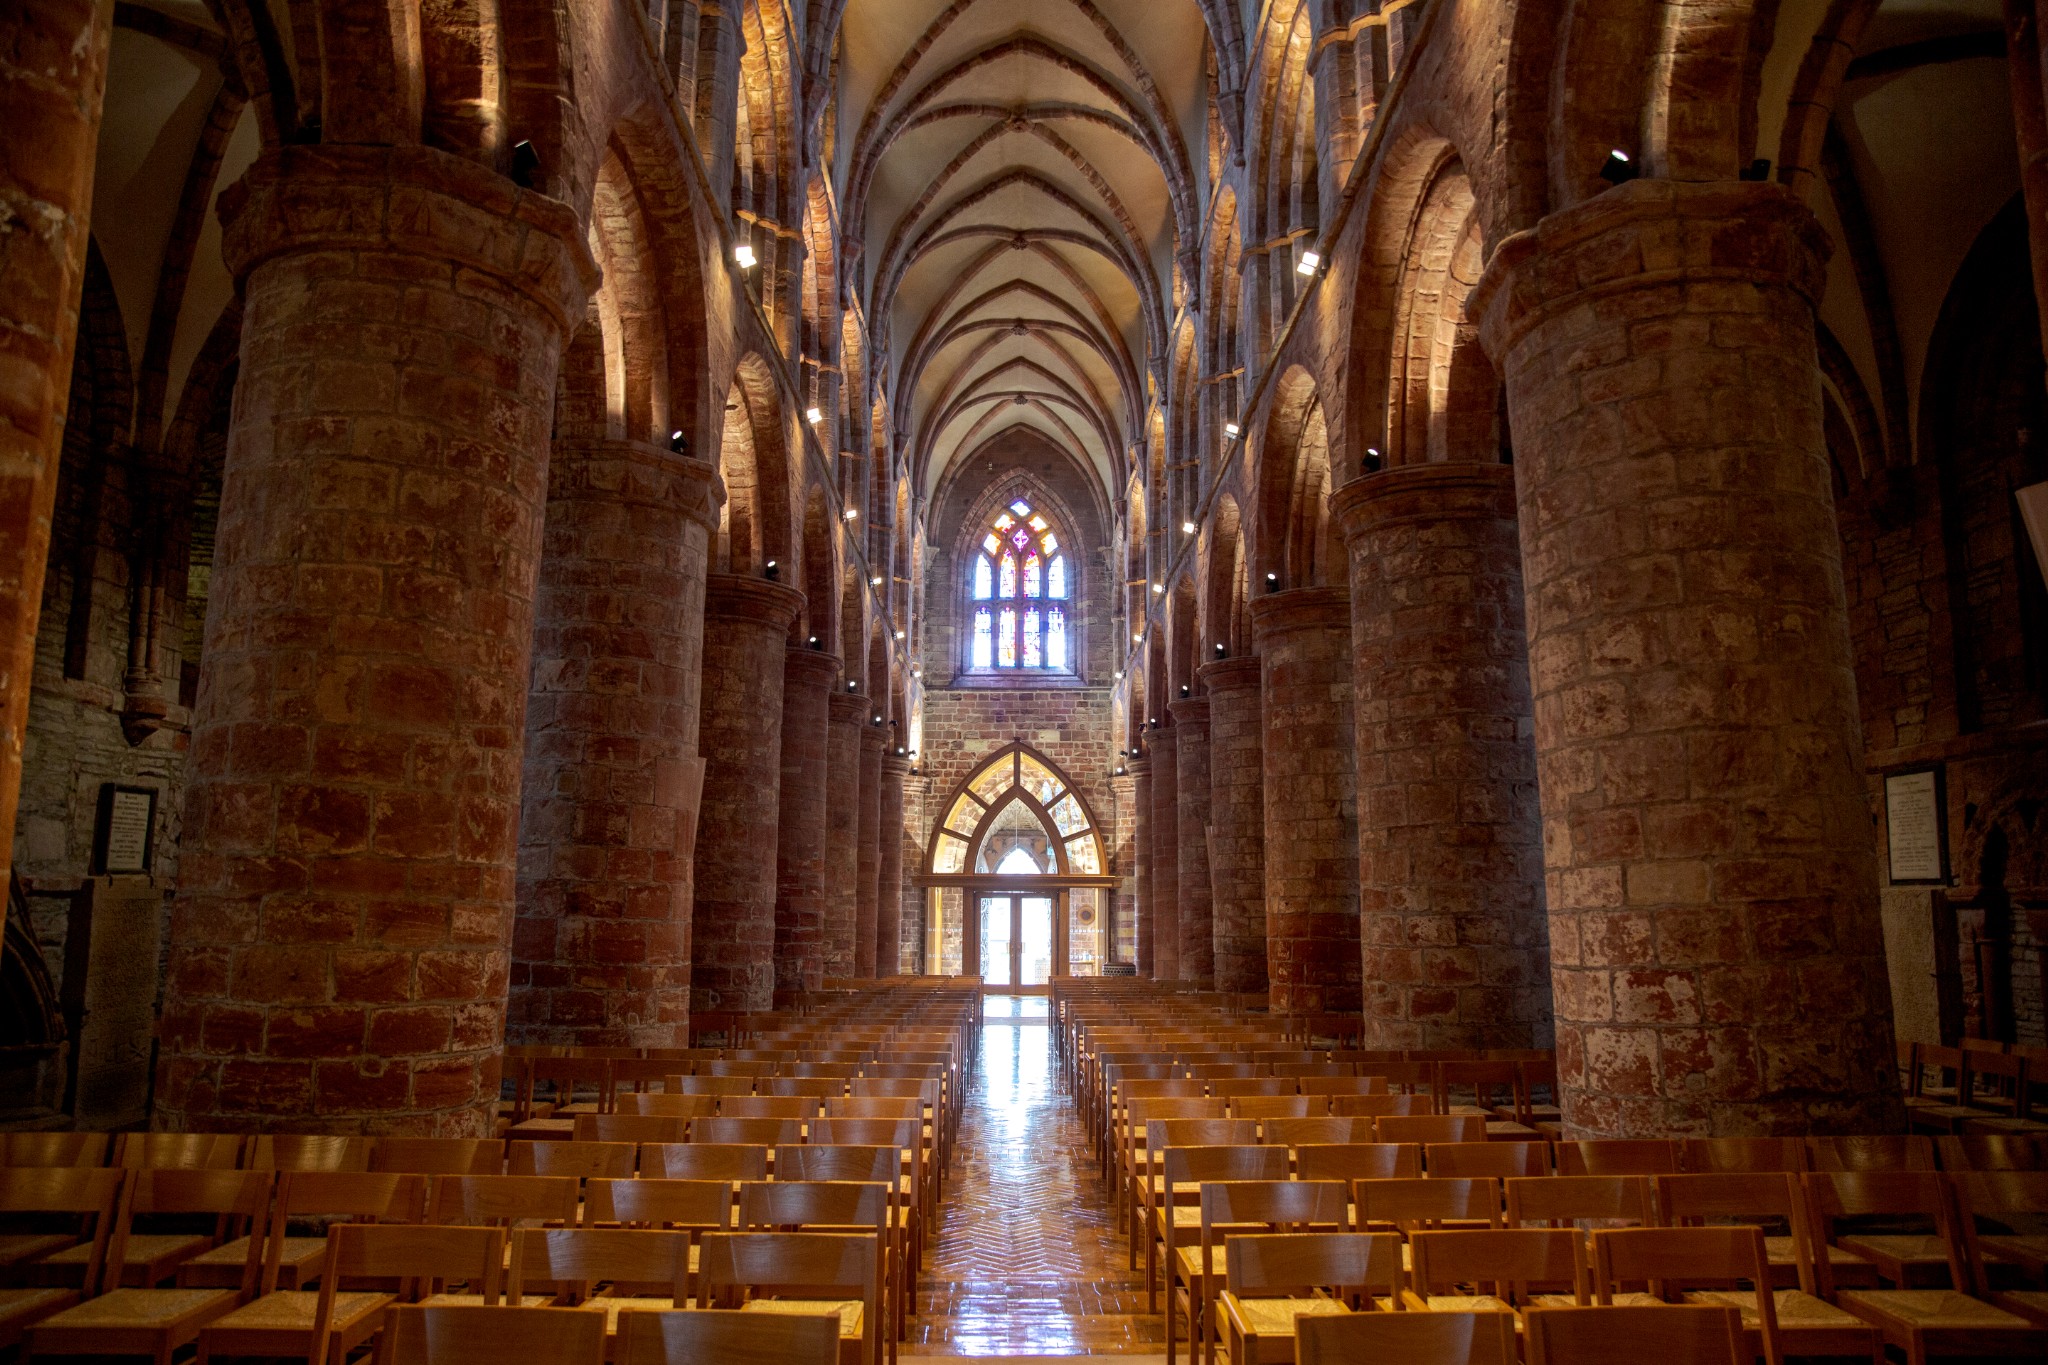 Interior view of St Magnus Cathedral, Orkney